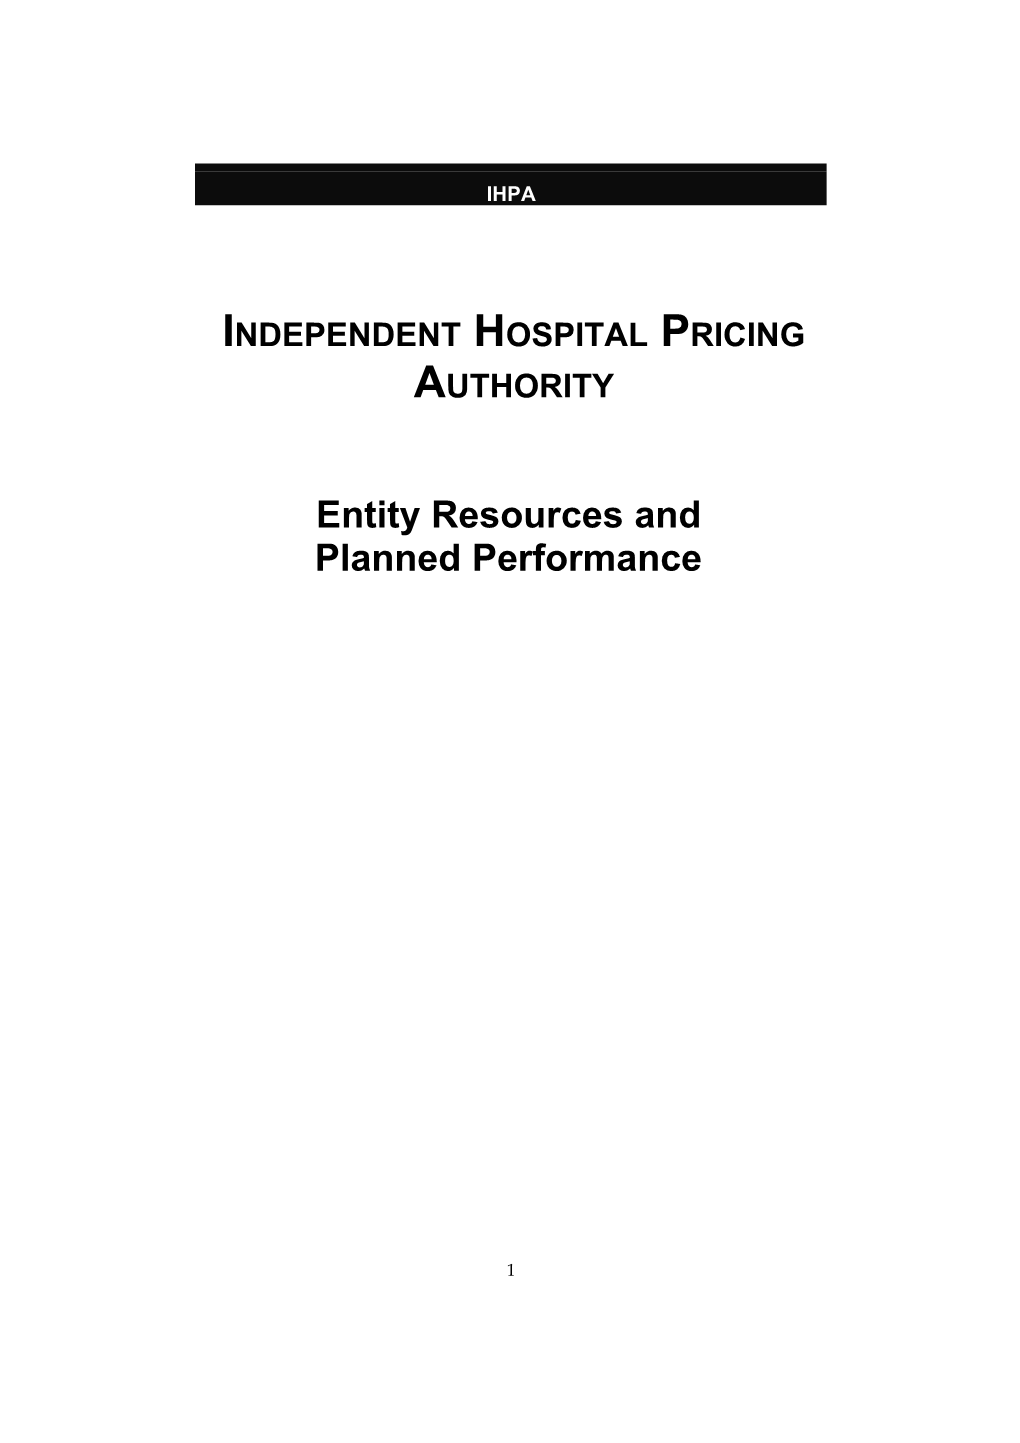 Independent Hospital Pricing Authority